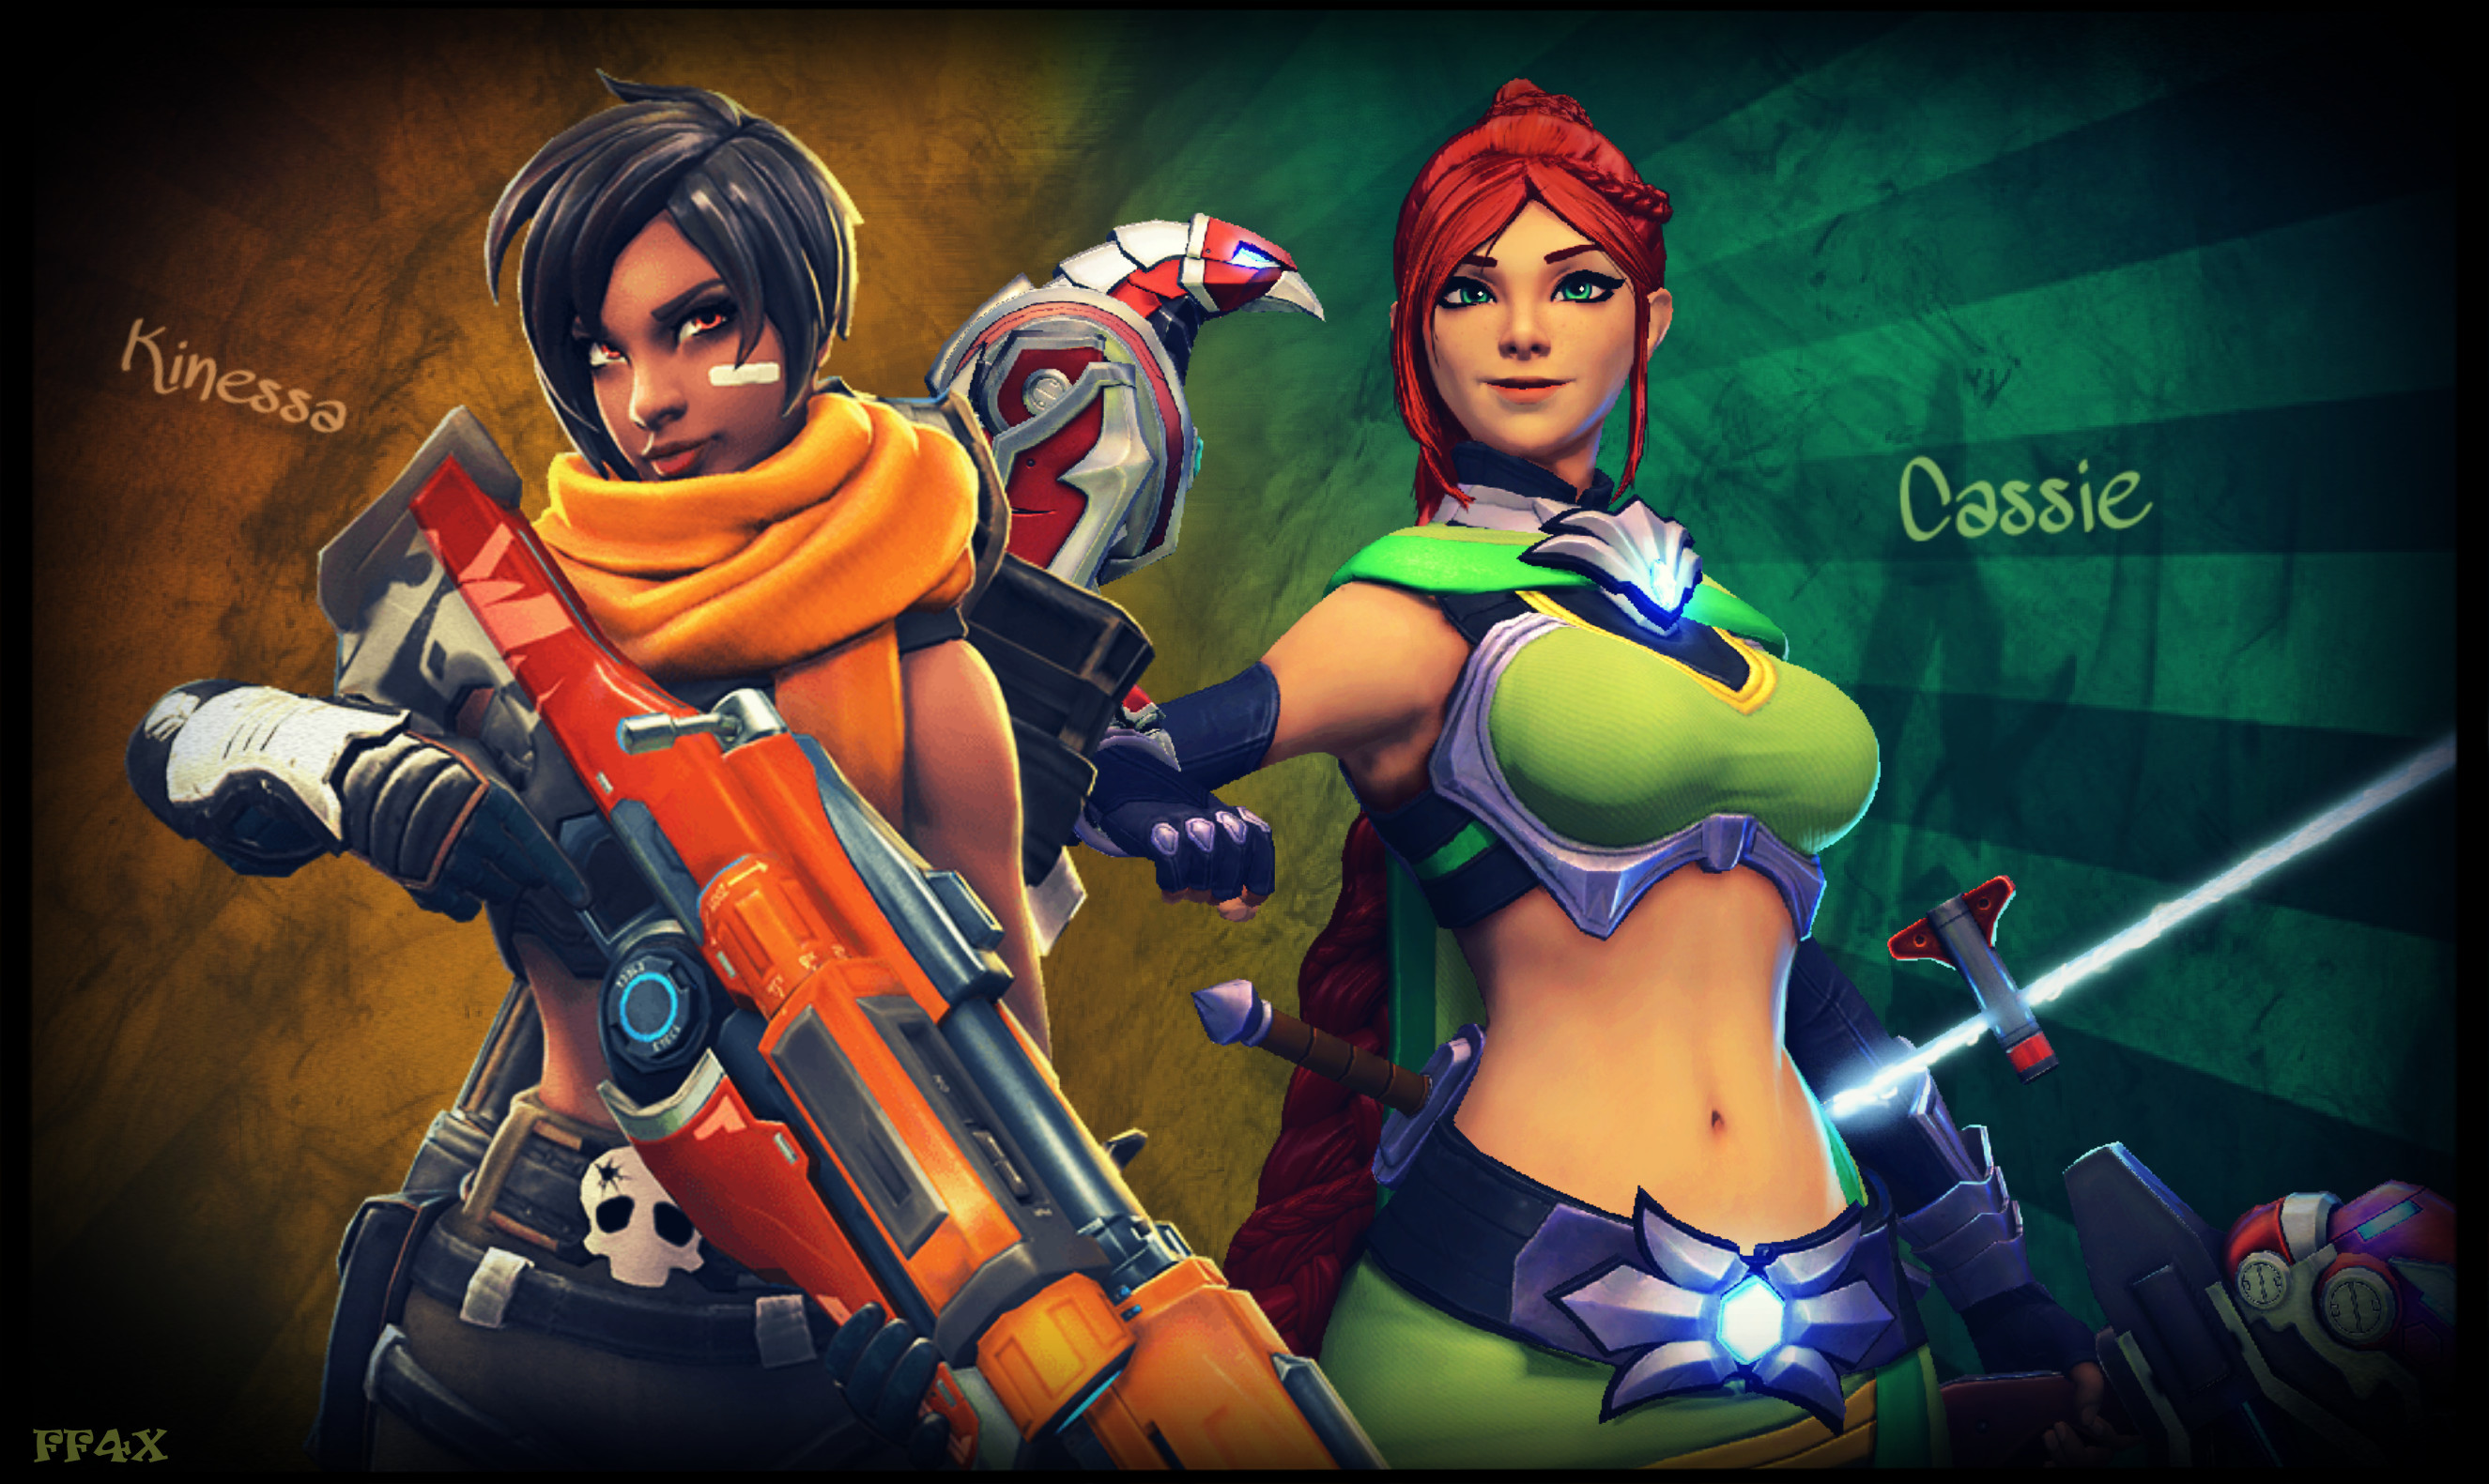 2651x1581 Paladins Cassie and Kinessa Wallpaper by FireFox4X Paladins Cassie and  Kinessa Wallpaper by FireFox4X